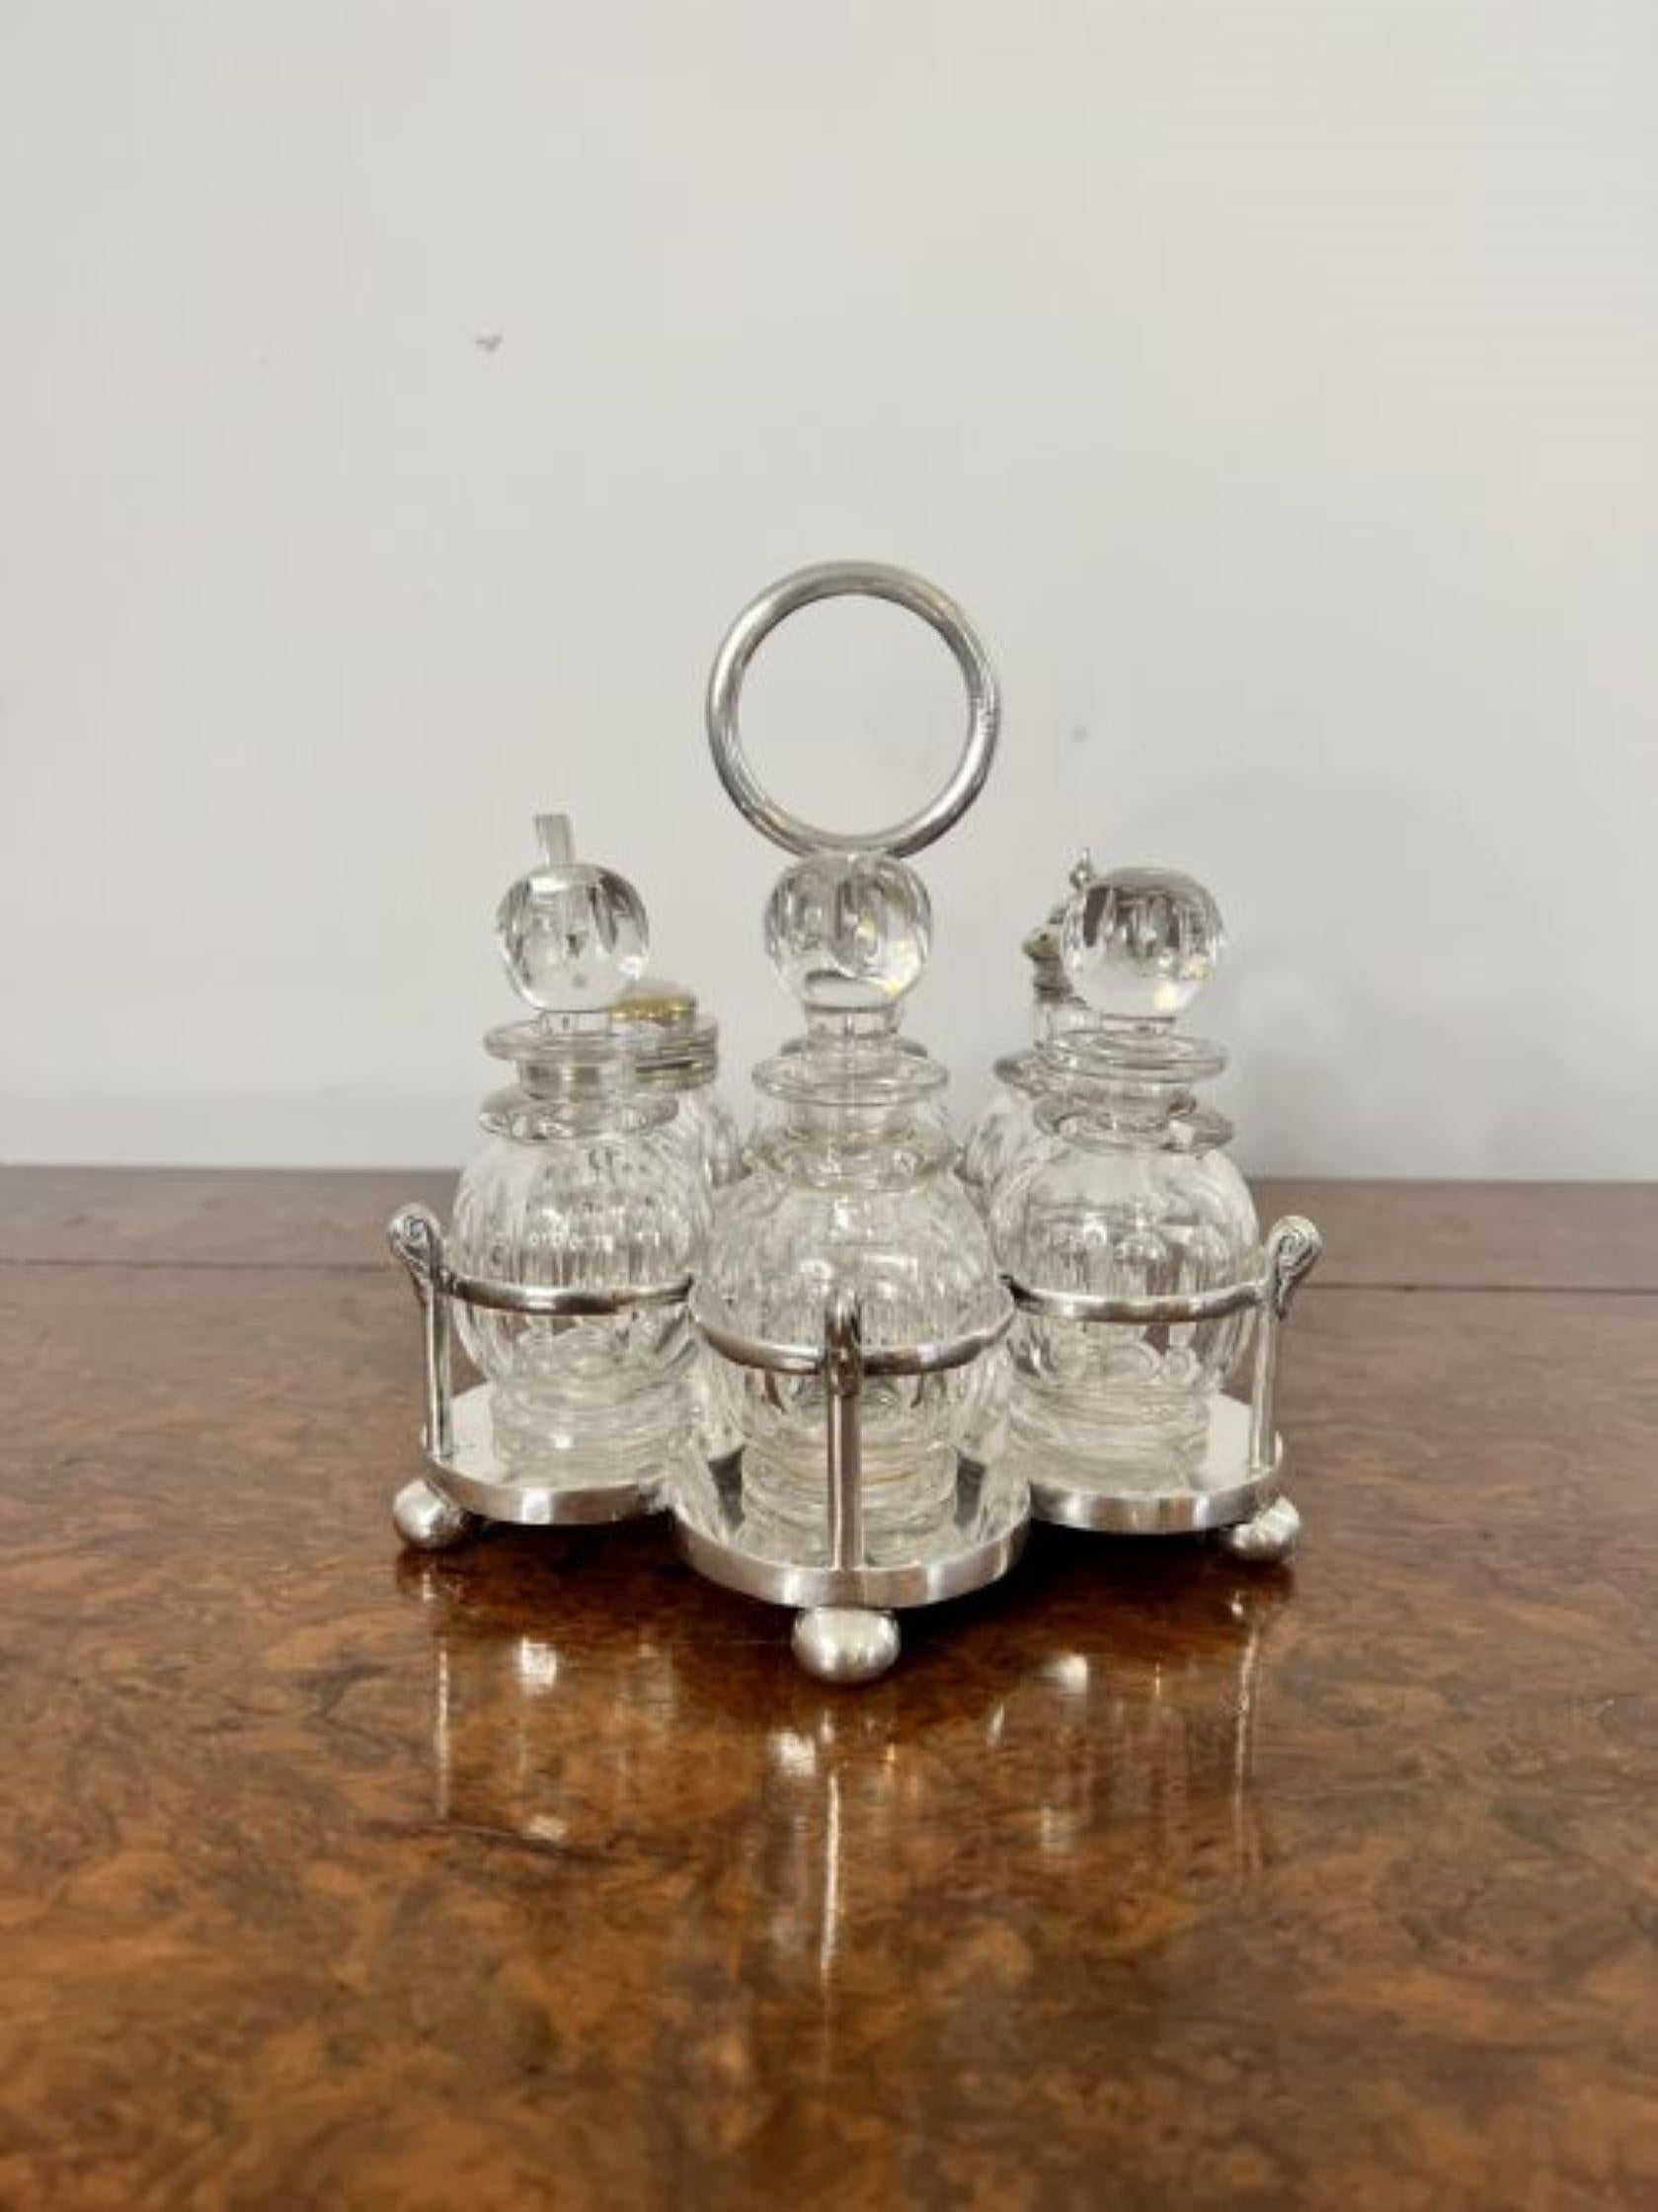 Fantastic quality antique Edwardian silver plated cruet set having a quality silver plated shaped stand with a circular handle to the middle with six original glass bottles with silver plated tops for salt, pepper, vinegar, mustard and oils.